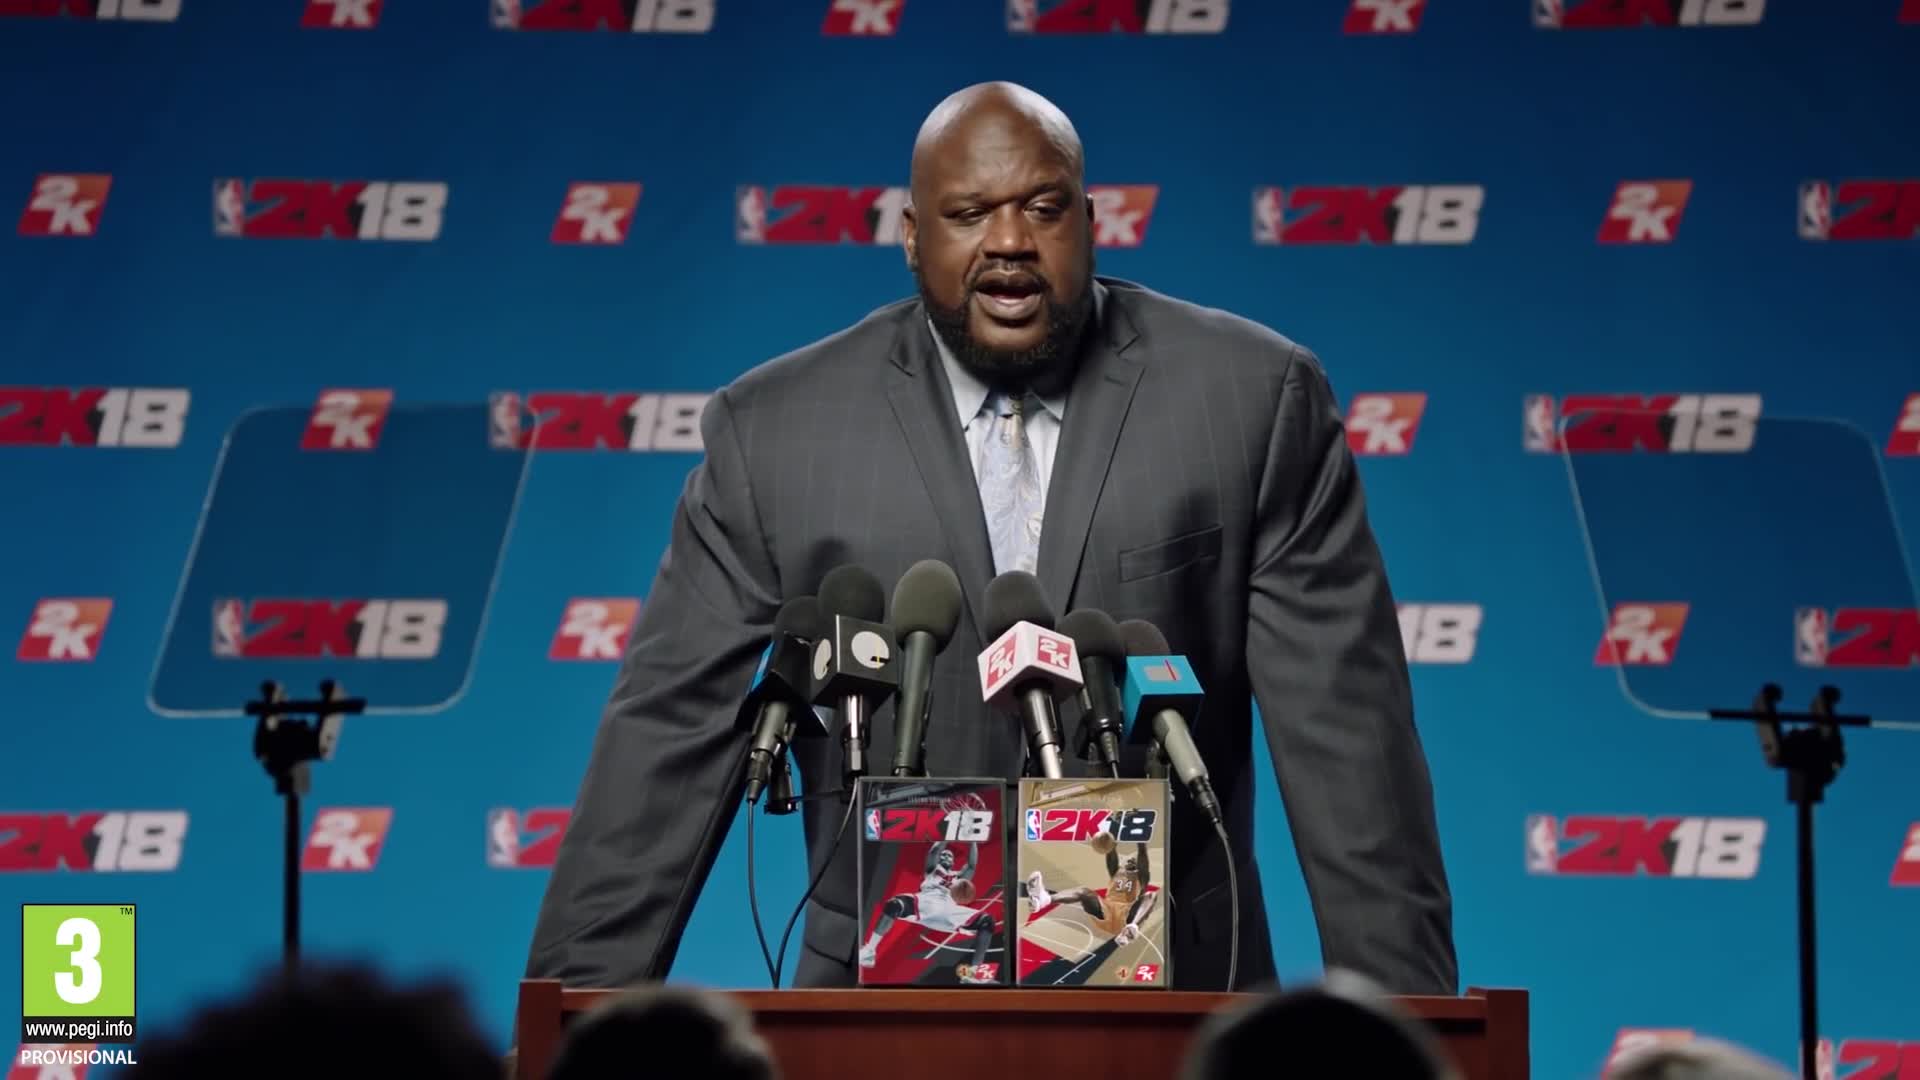 NBA 2K18: Legend Edition - Featuring Shaquille O'Neal - Announcement Video